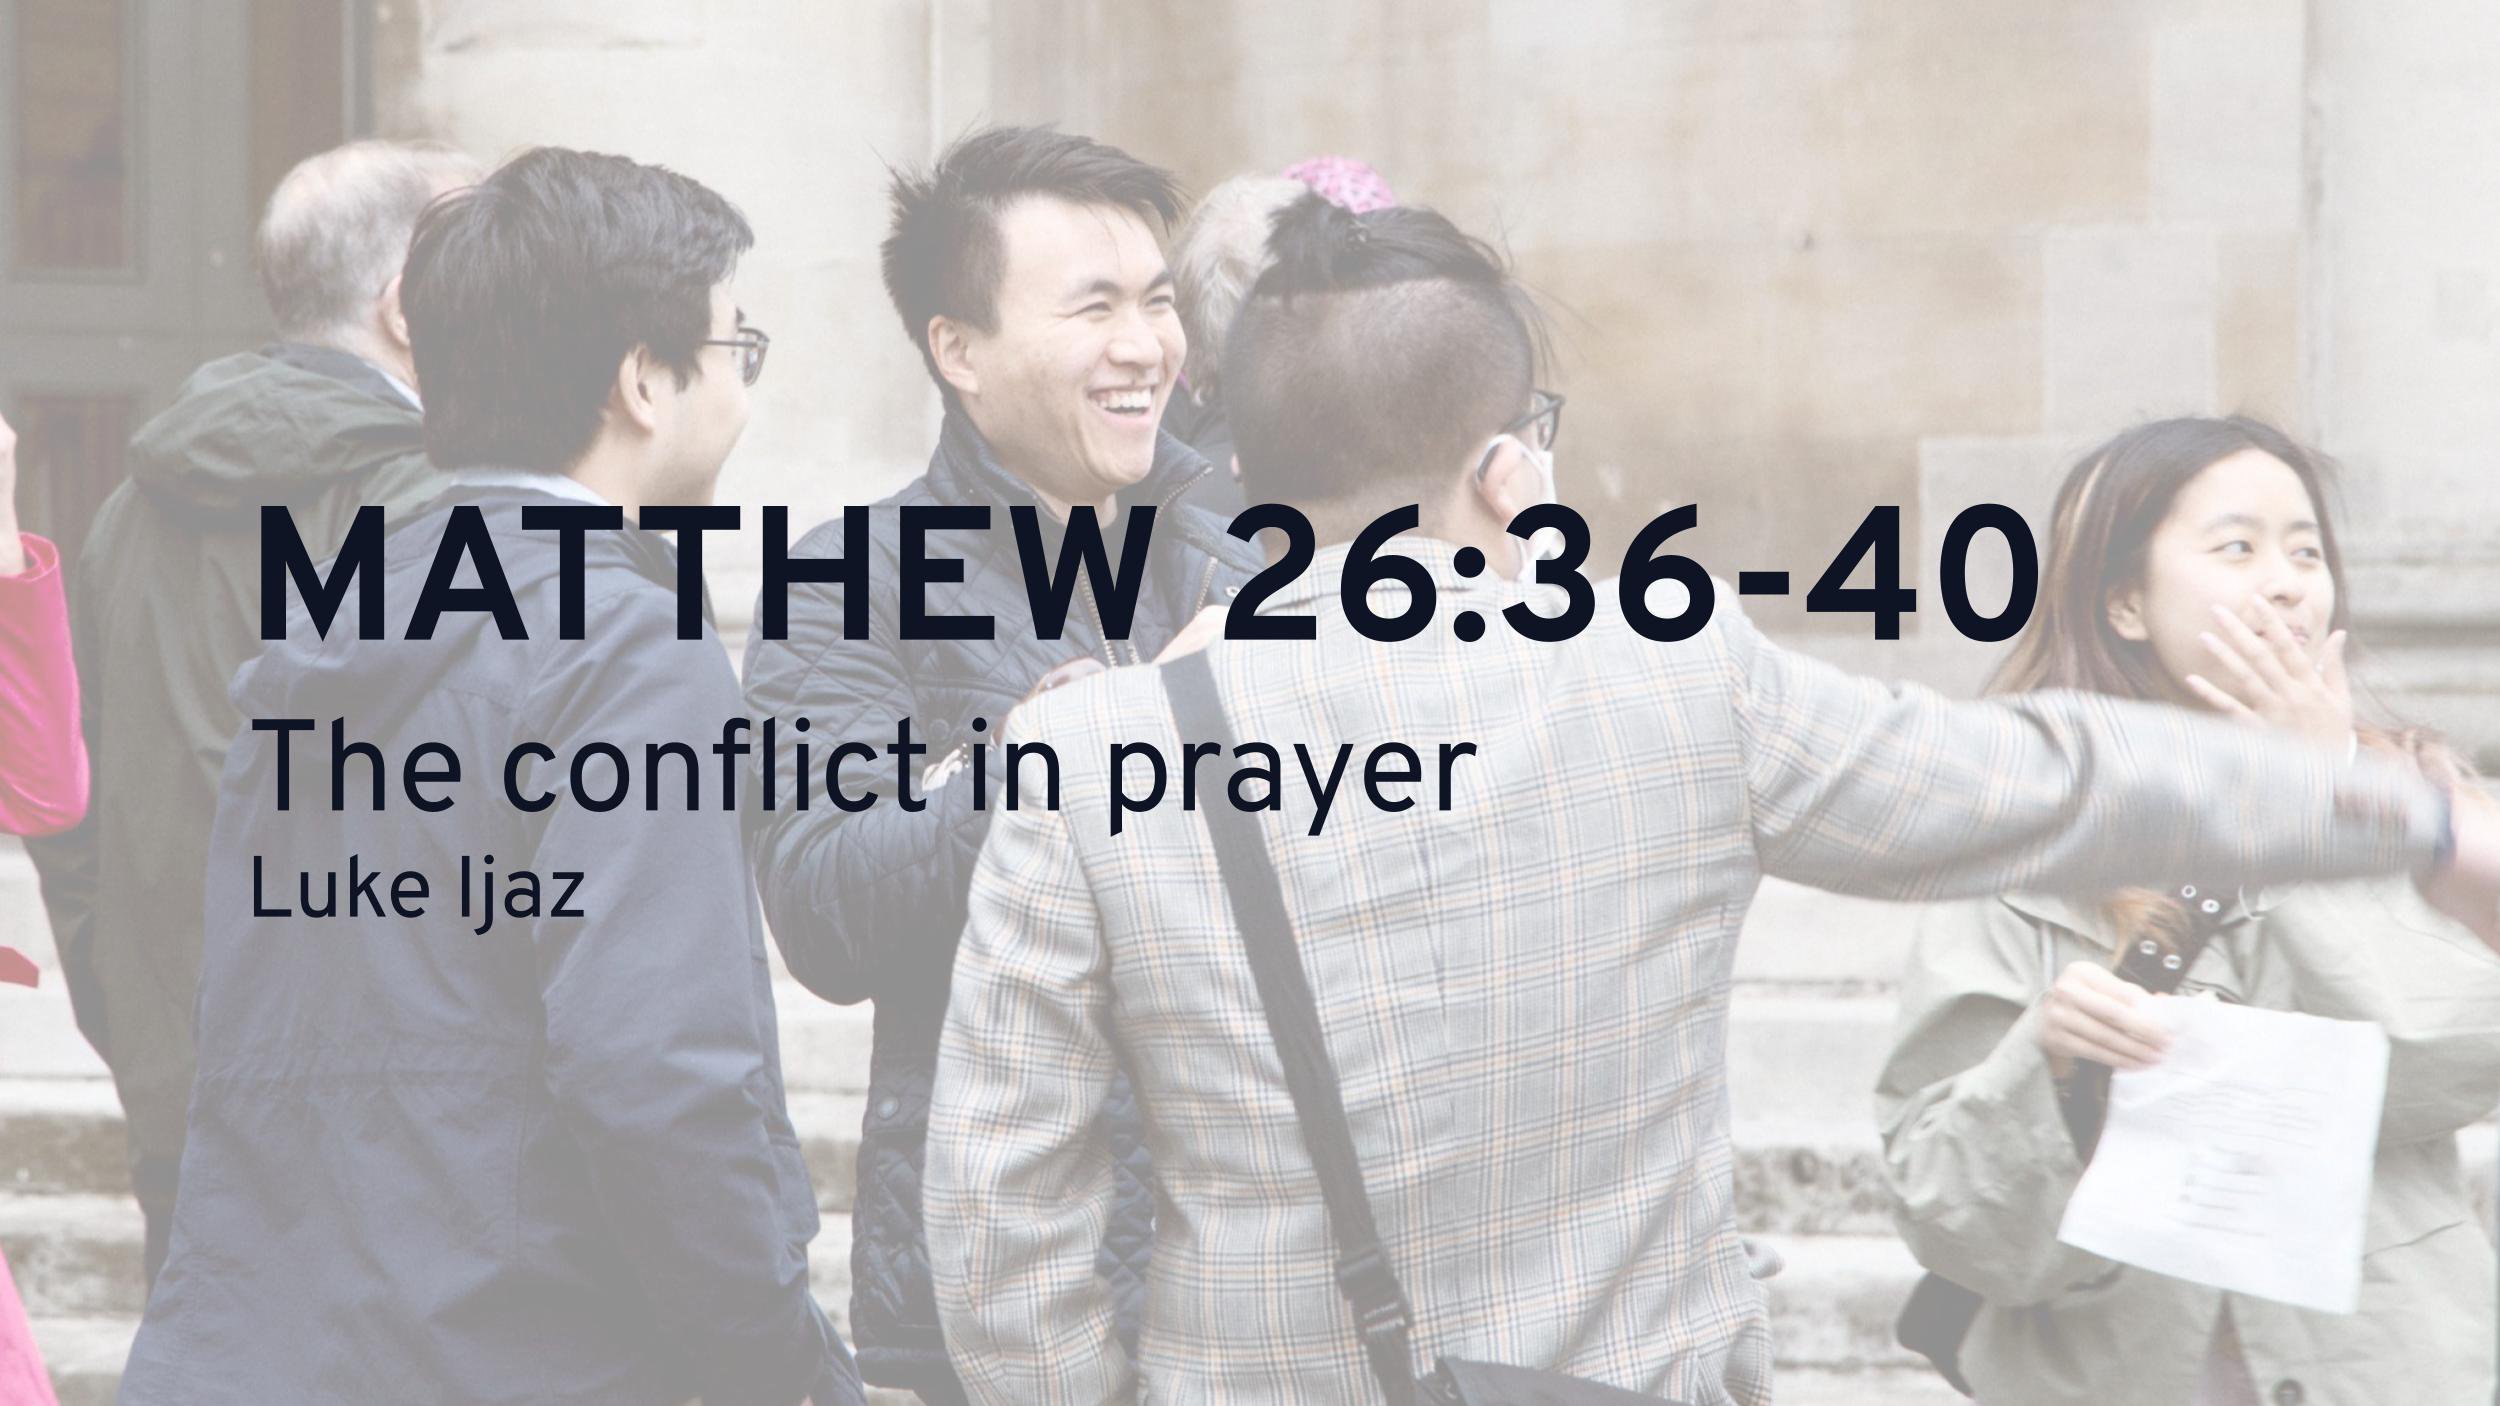 The conflict in prayer